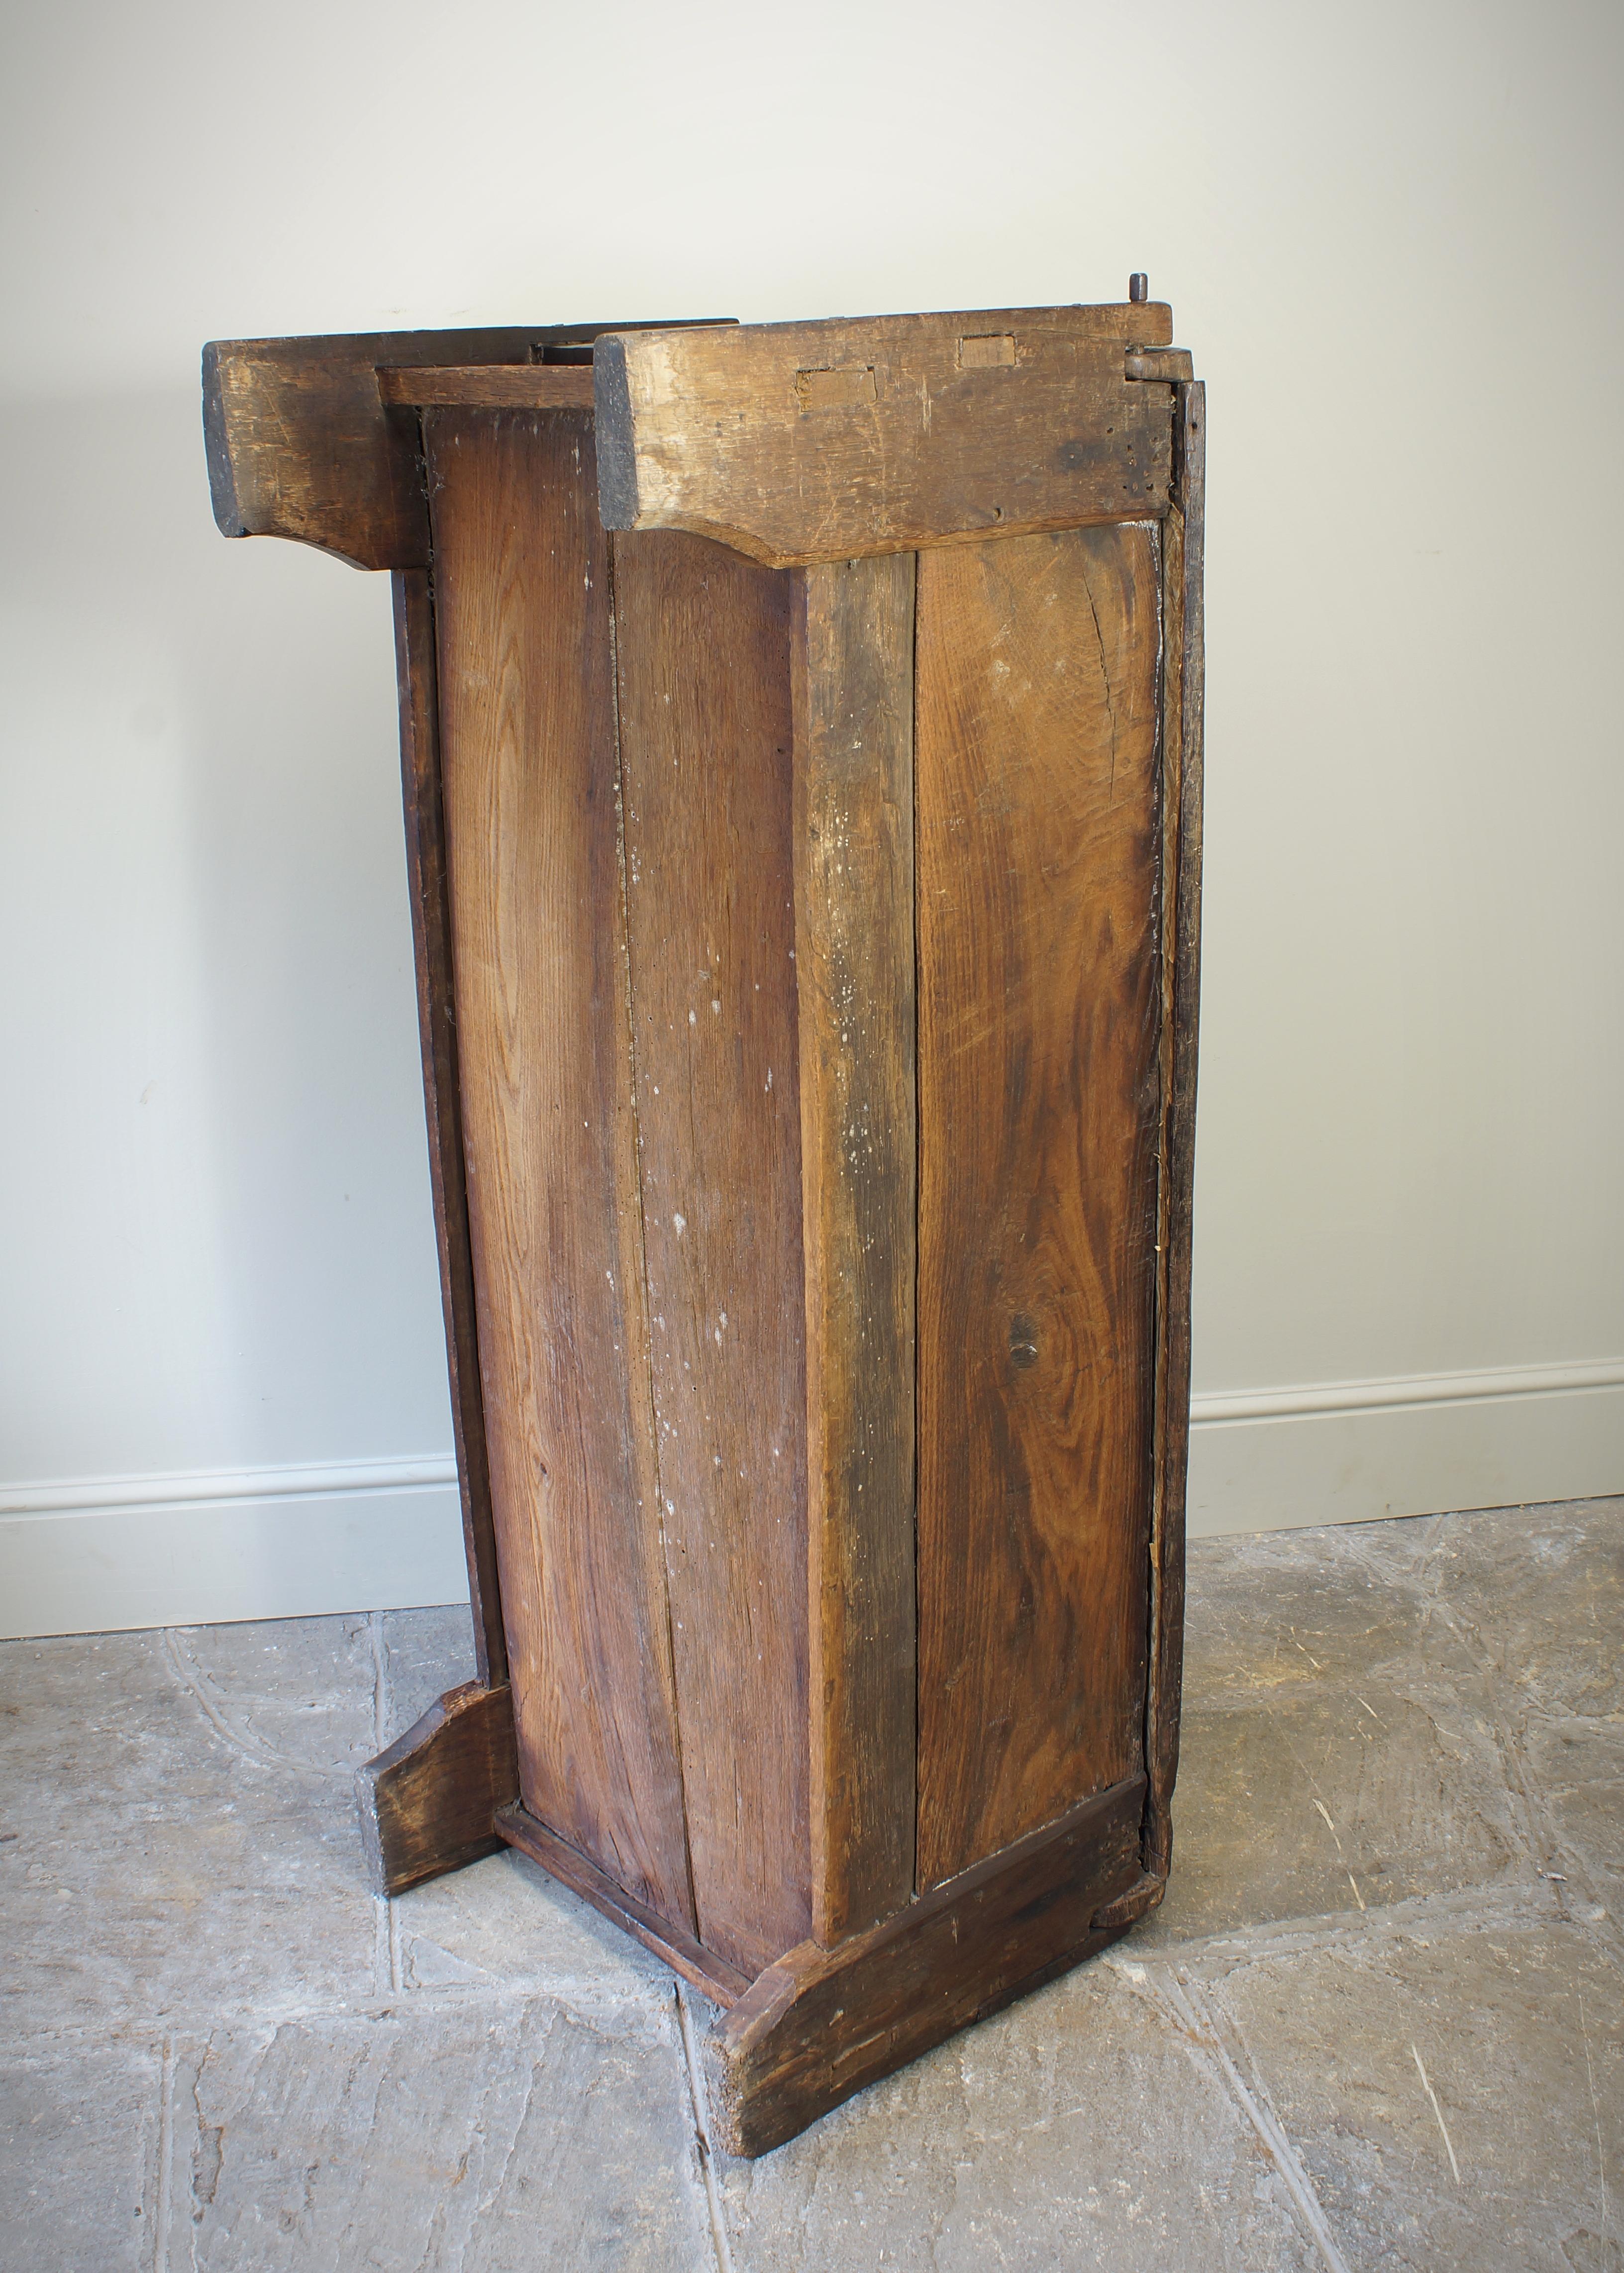 A 16th Century Boarded Oak Clamp-front Chest Or Ark, Welsh Borders, Circa 1550 For Sale 5